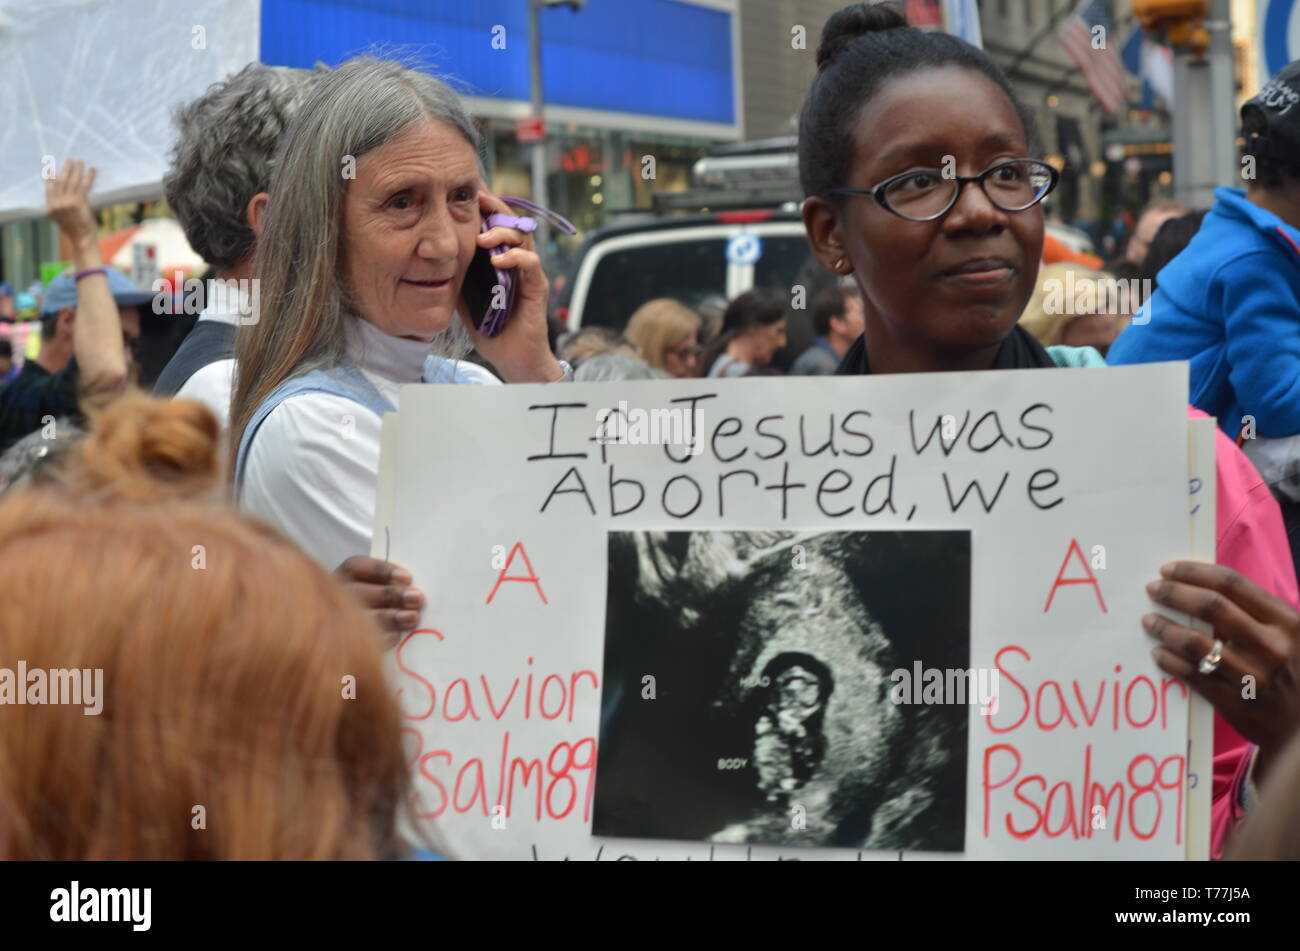 New York, USA. 4th May, 2019. A Participant seen holding a placard during the Abortion rally at the Times Square in New York.People gathered in Times Square to protest against abortion law in New York State, the law legalizes late term abortion until the moment of birth. During the demonstration a doctor performed a live 4D ultrasound showing an unborn baby in the womb & callousness of late term abortion. Credit: Ryan Rahman/SOPA Images/ZUMA Wire/Alamy Live News Stock Photo